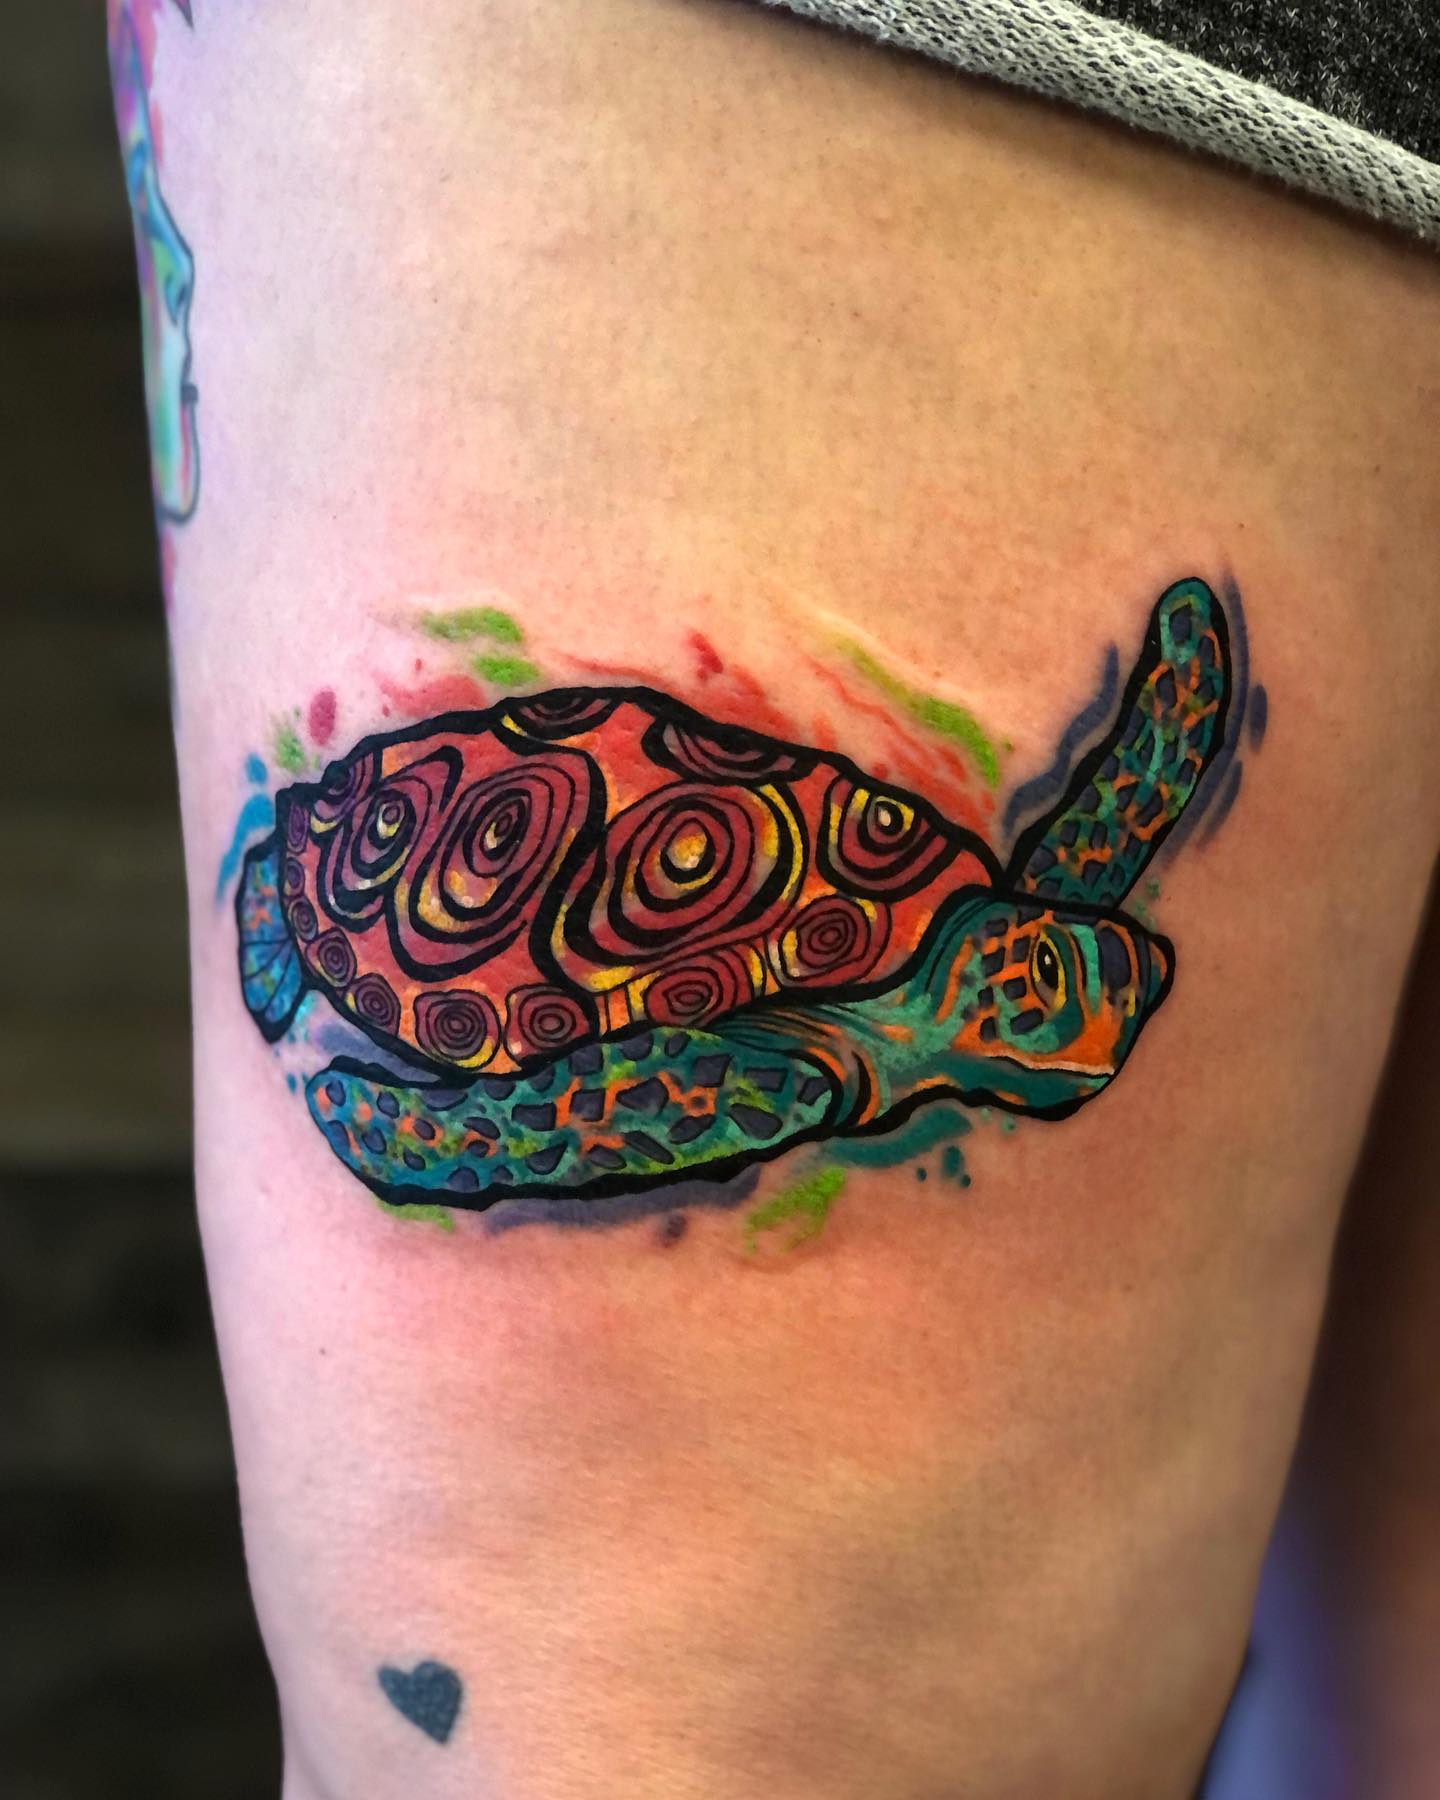 Wanna represent your love of the sea and marine biology, a colorful sea turtle tattoo is definitely for you! Get a tattoo like the one above on your upper leg to look amazing!